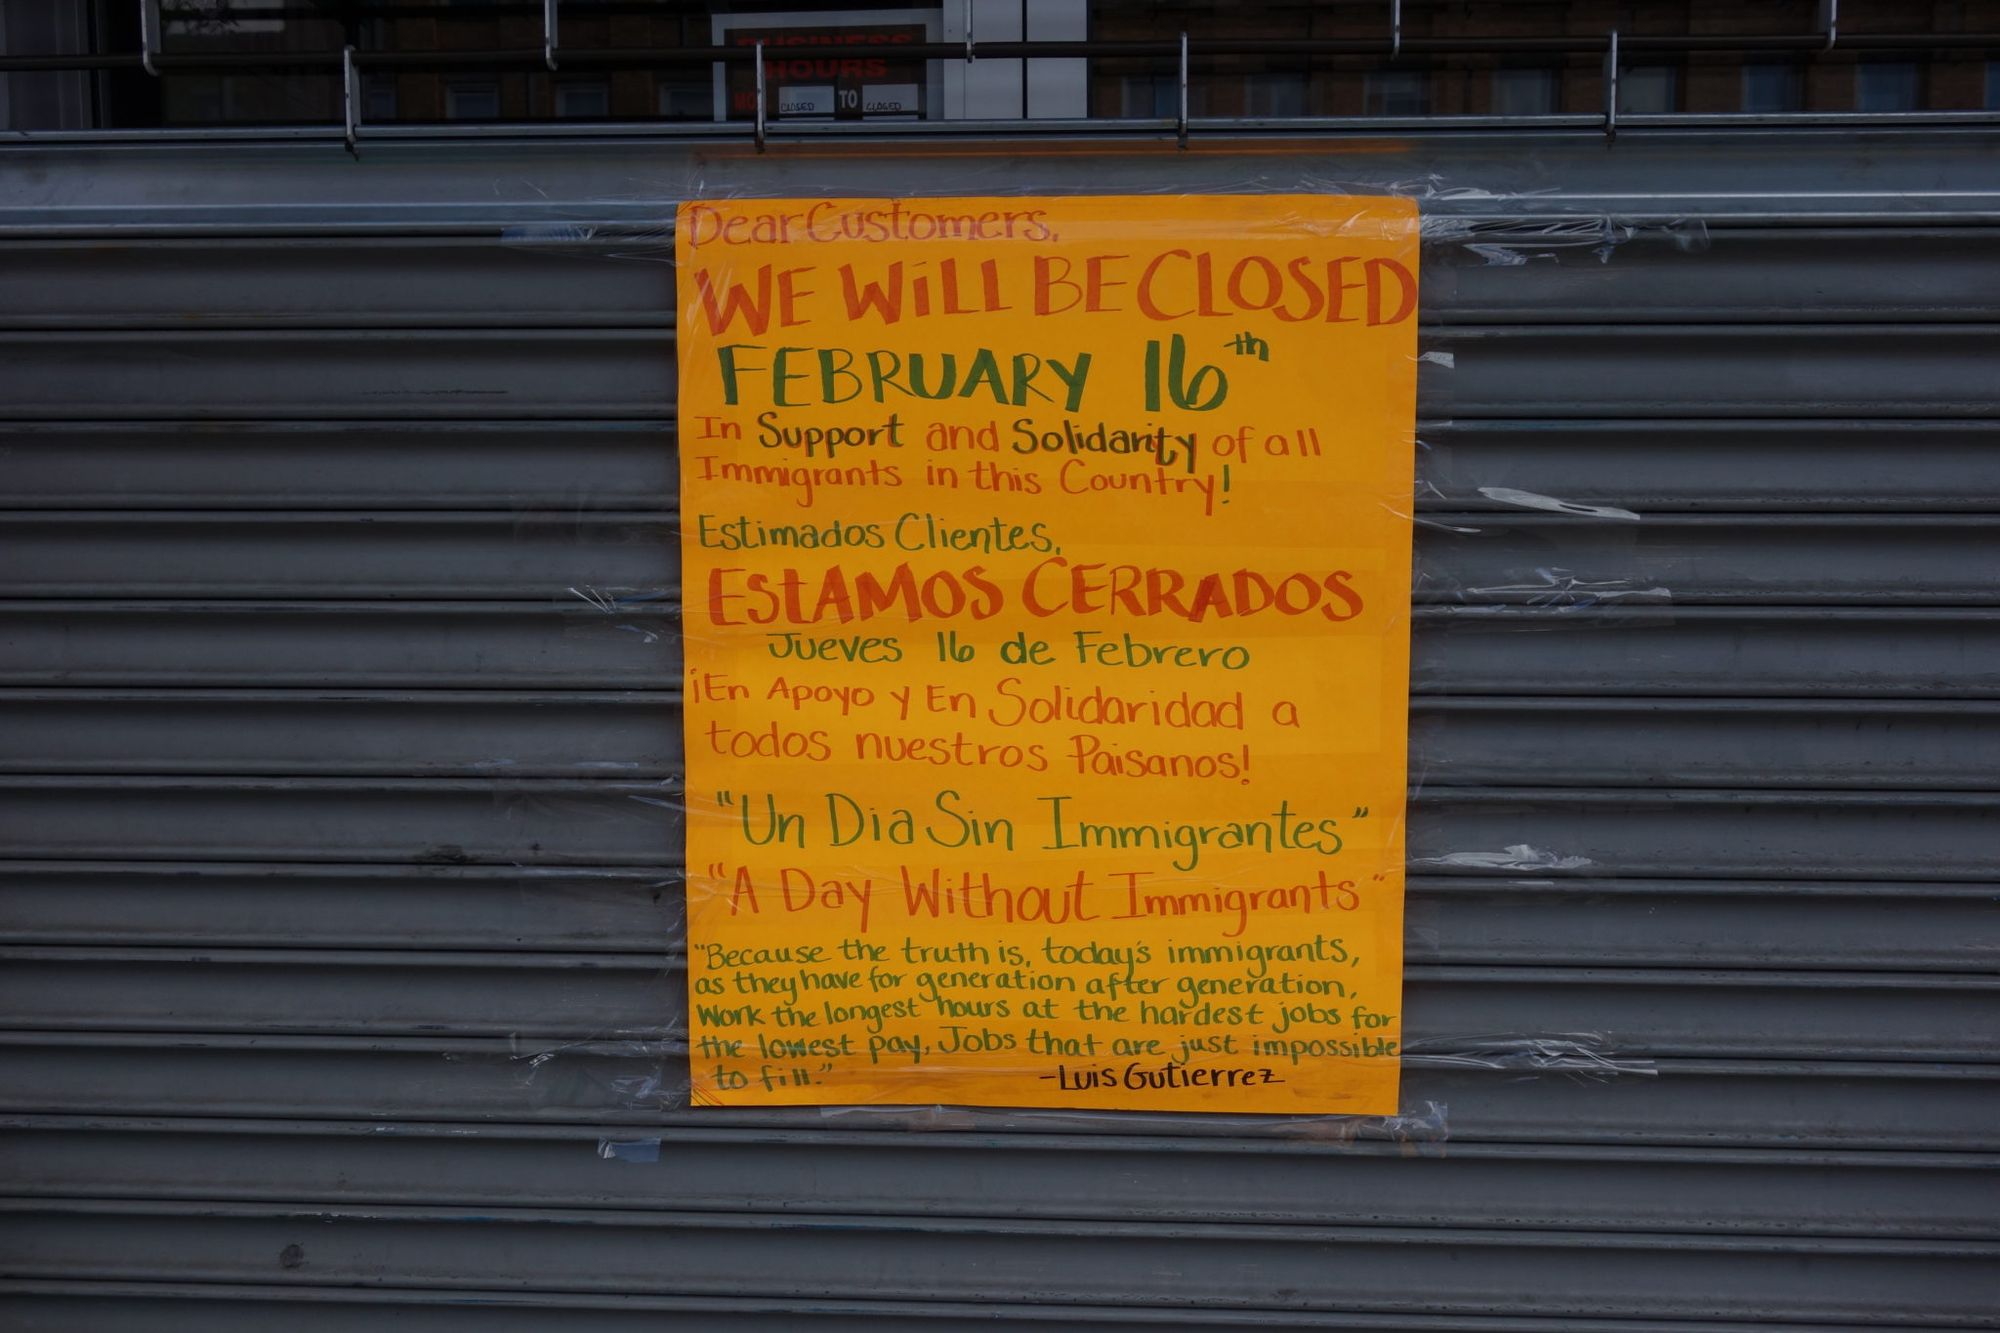 Who Closed Shop On “Day Without Immigrants”?